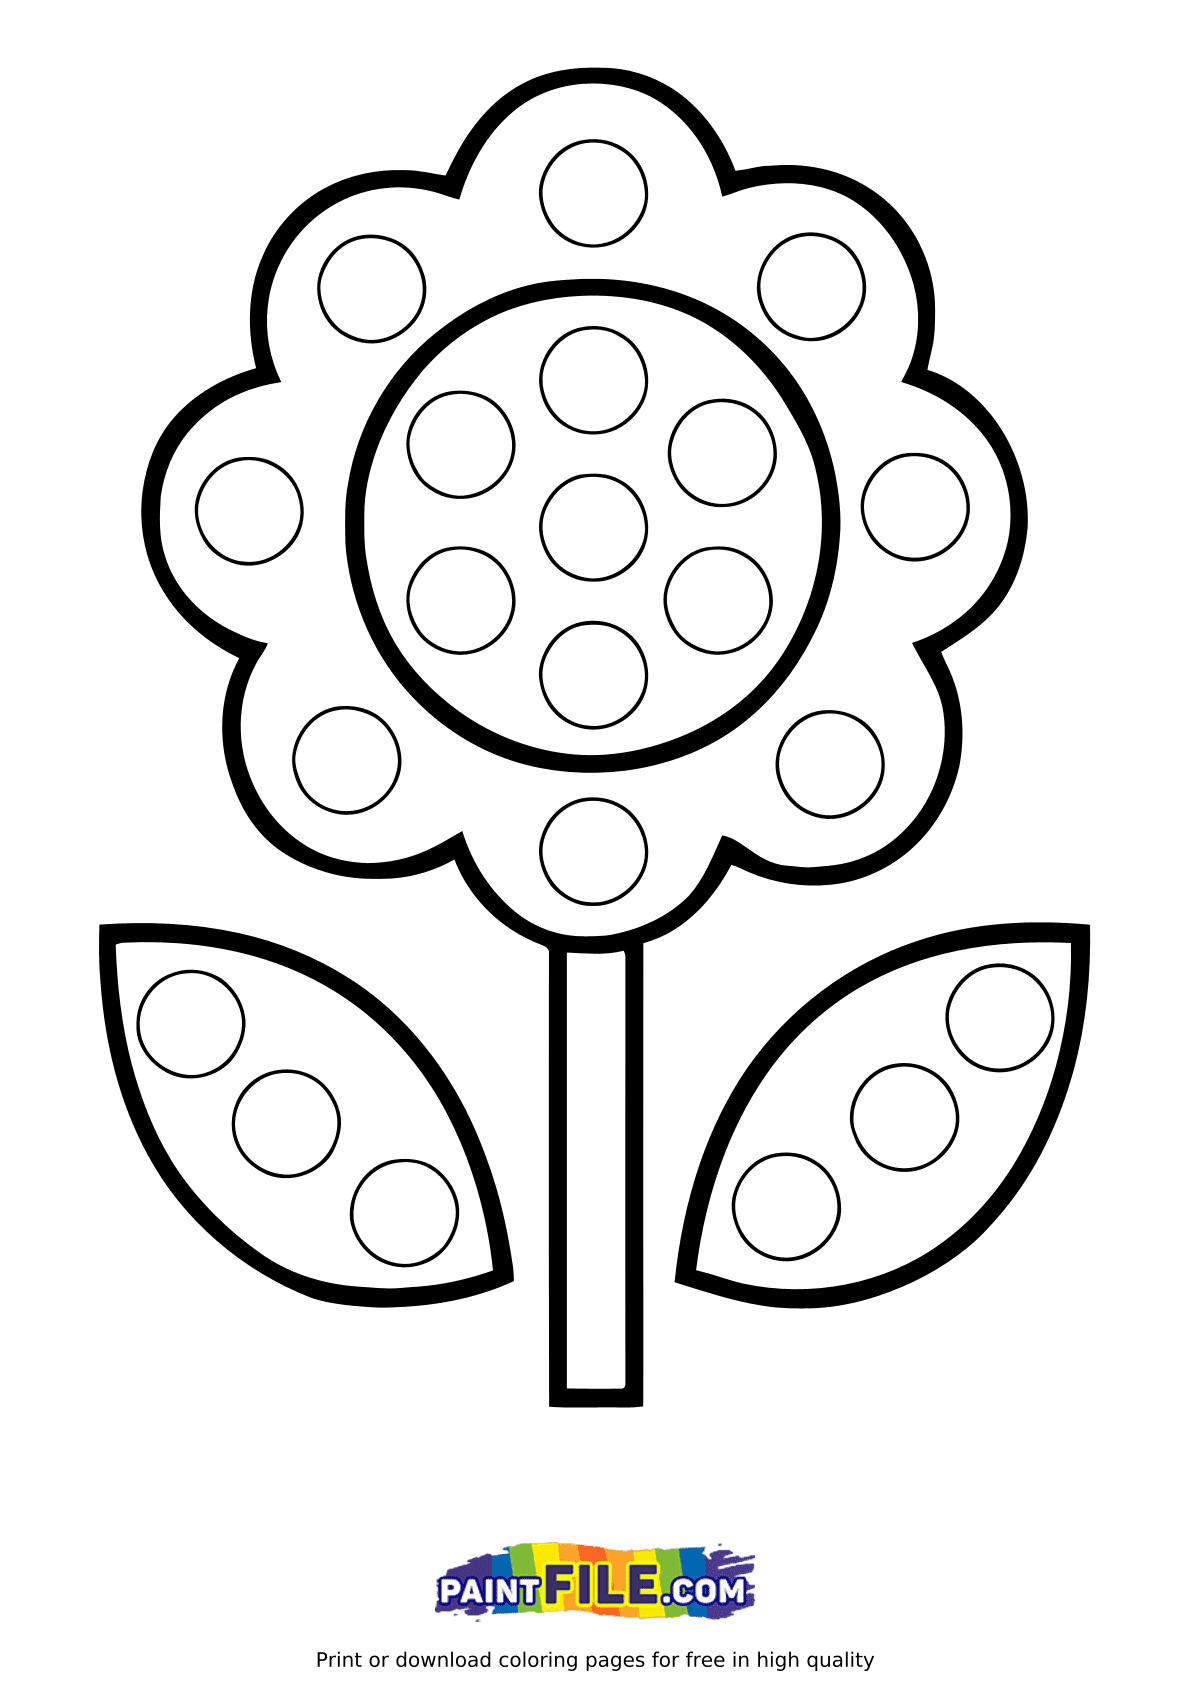 Yellow Flower Pop it Coloring Pages